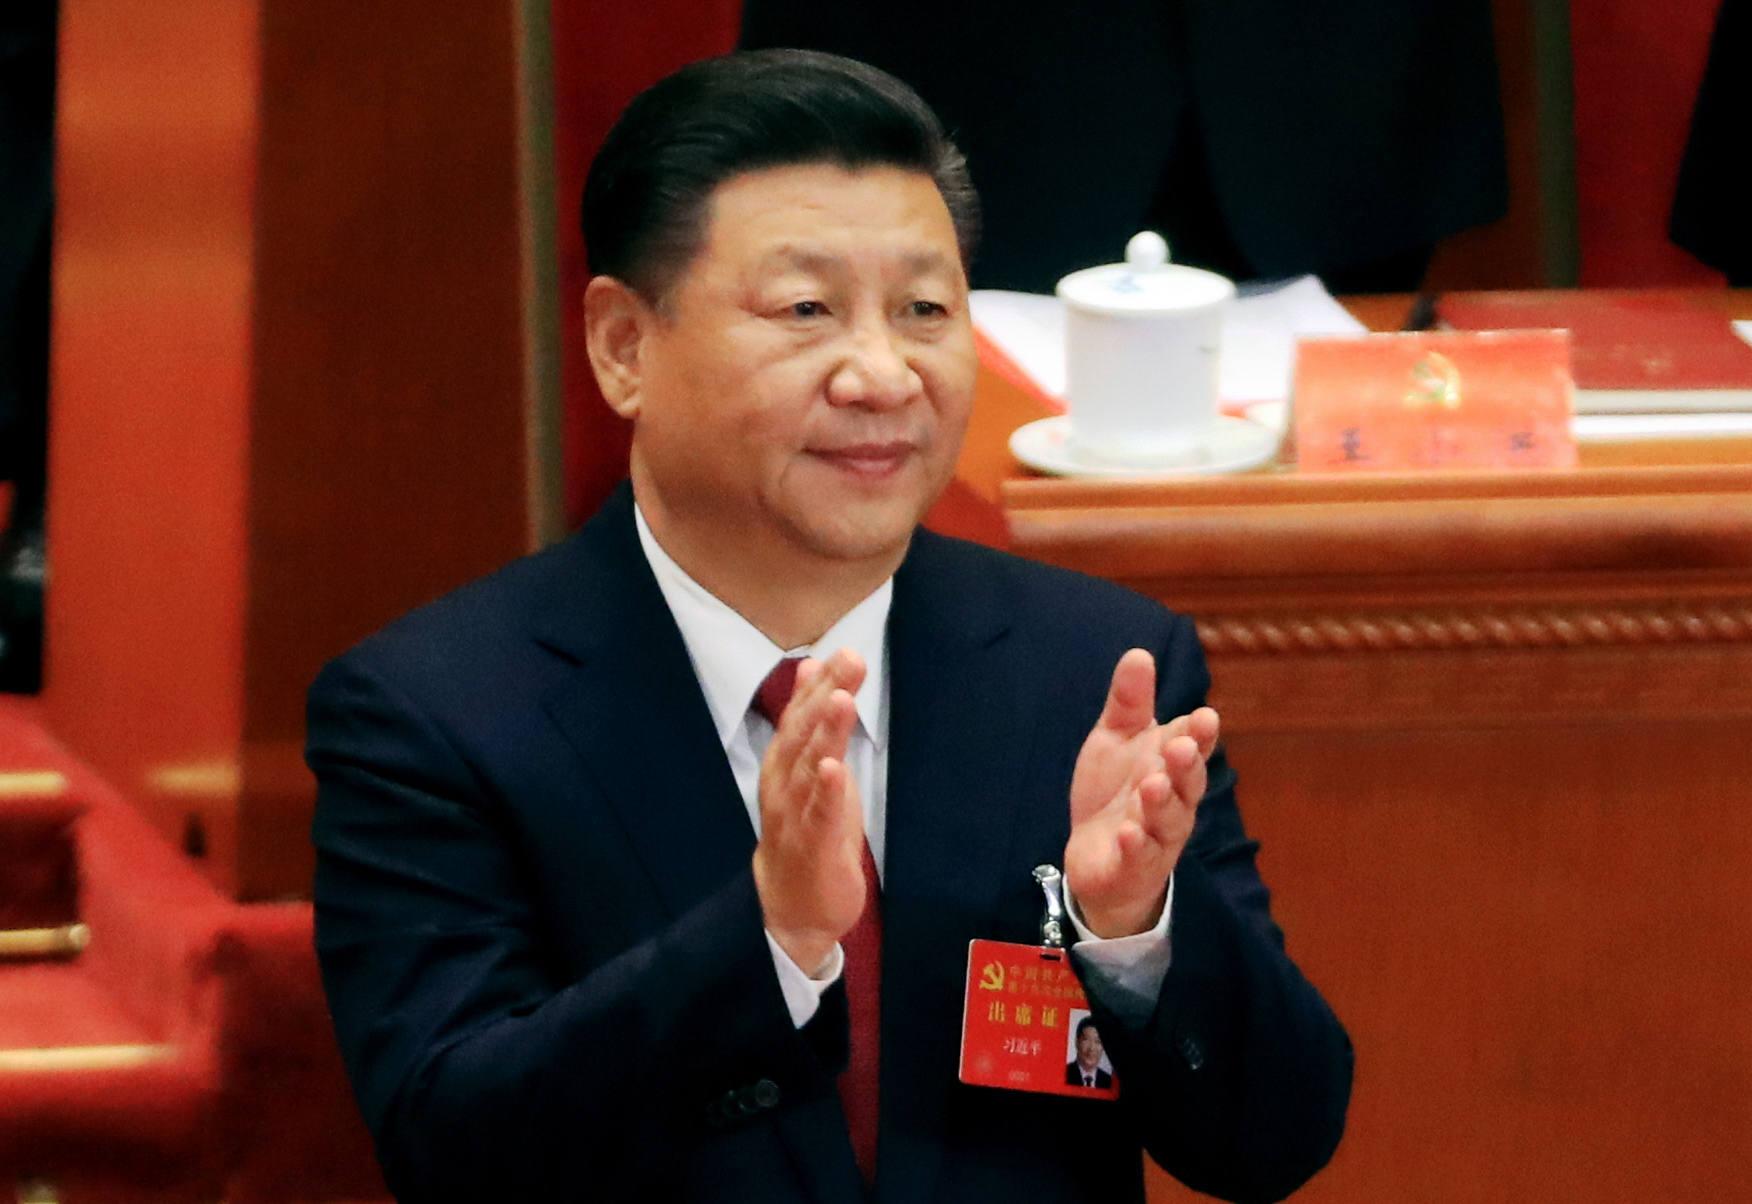 No successor needed: Xi Jinping's dream extends to 2035